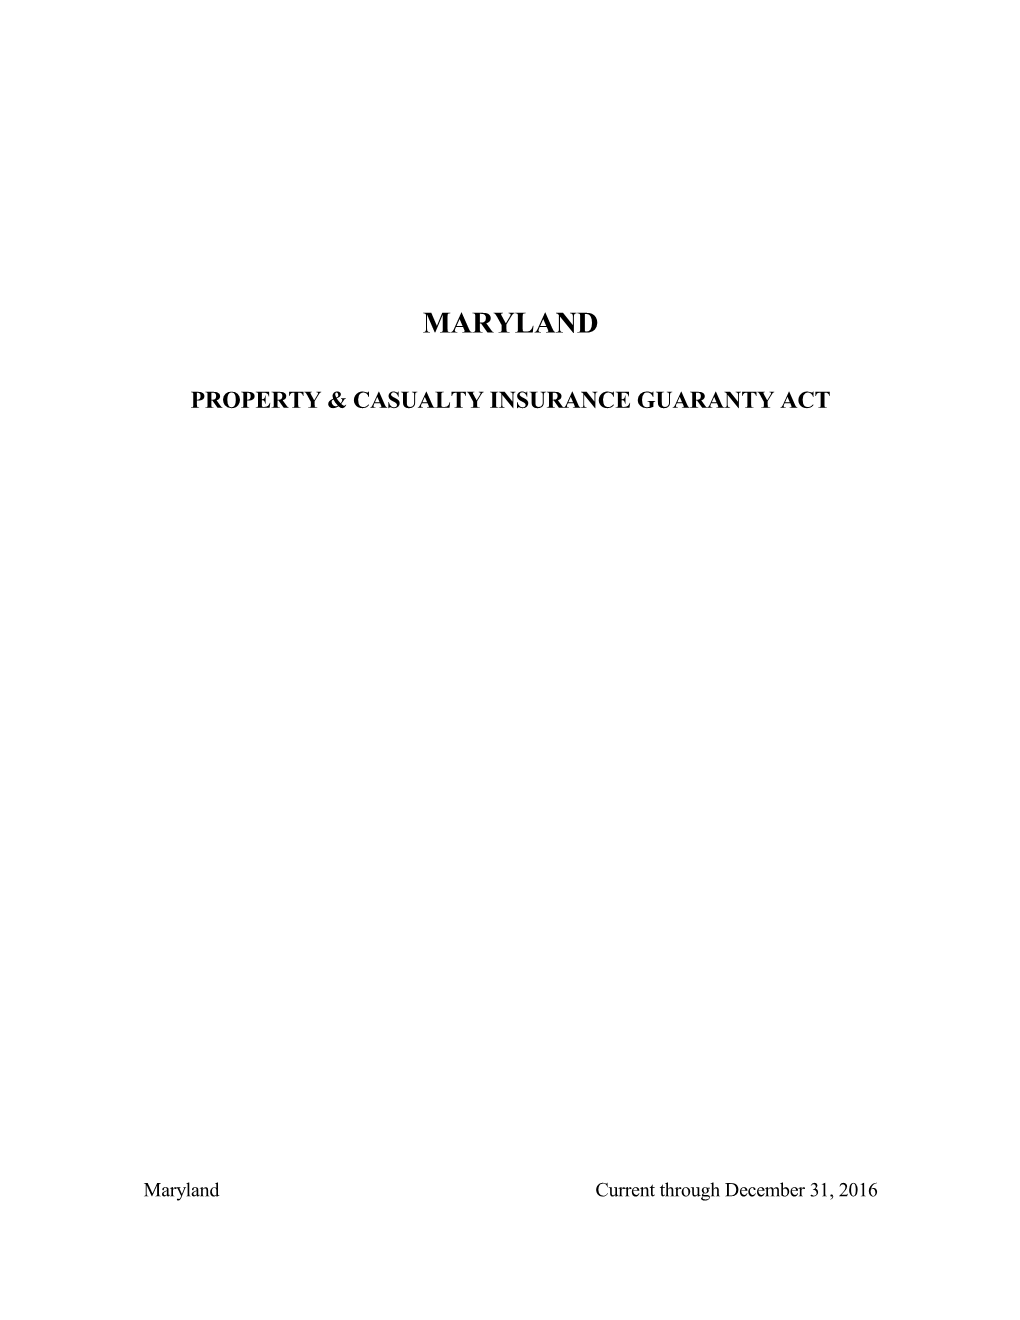 Property & Casualty Insurance Guaranty Act